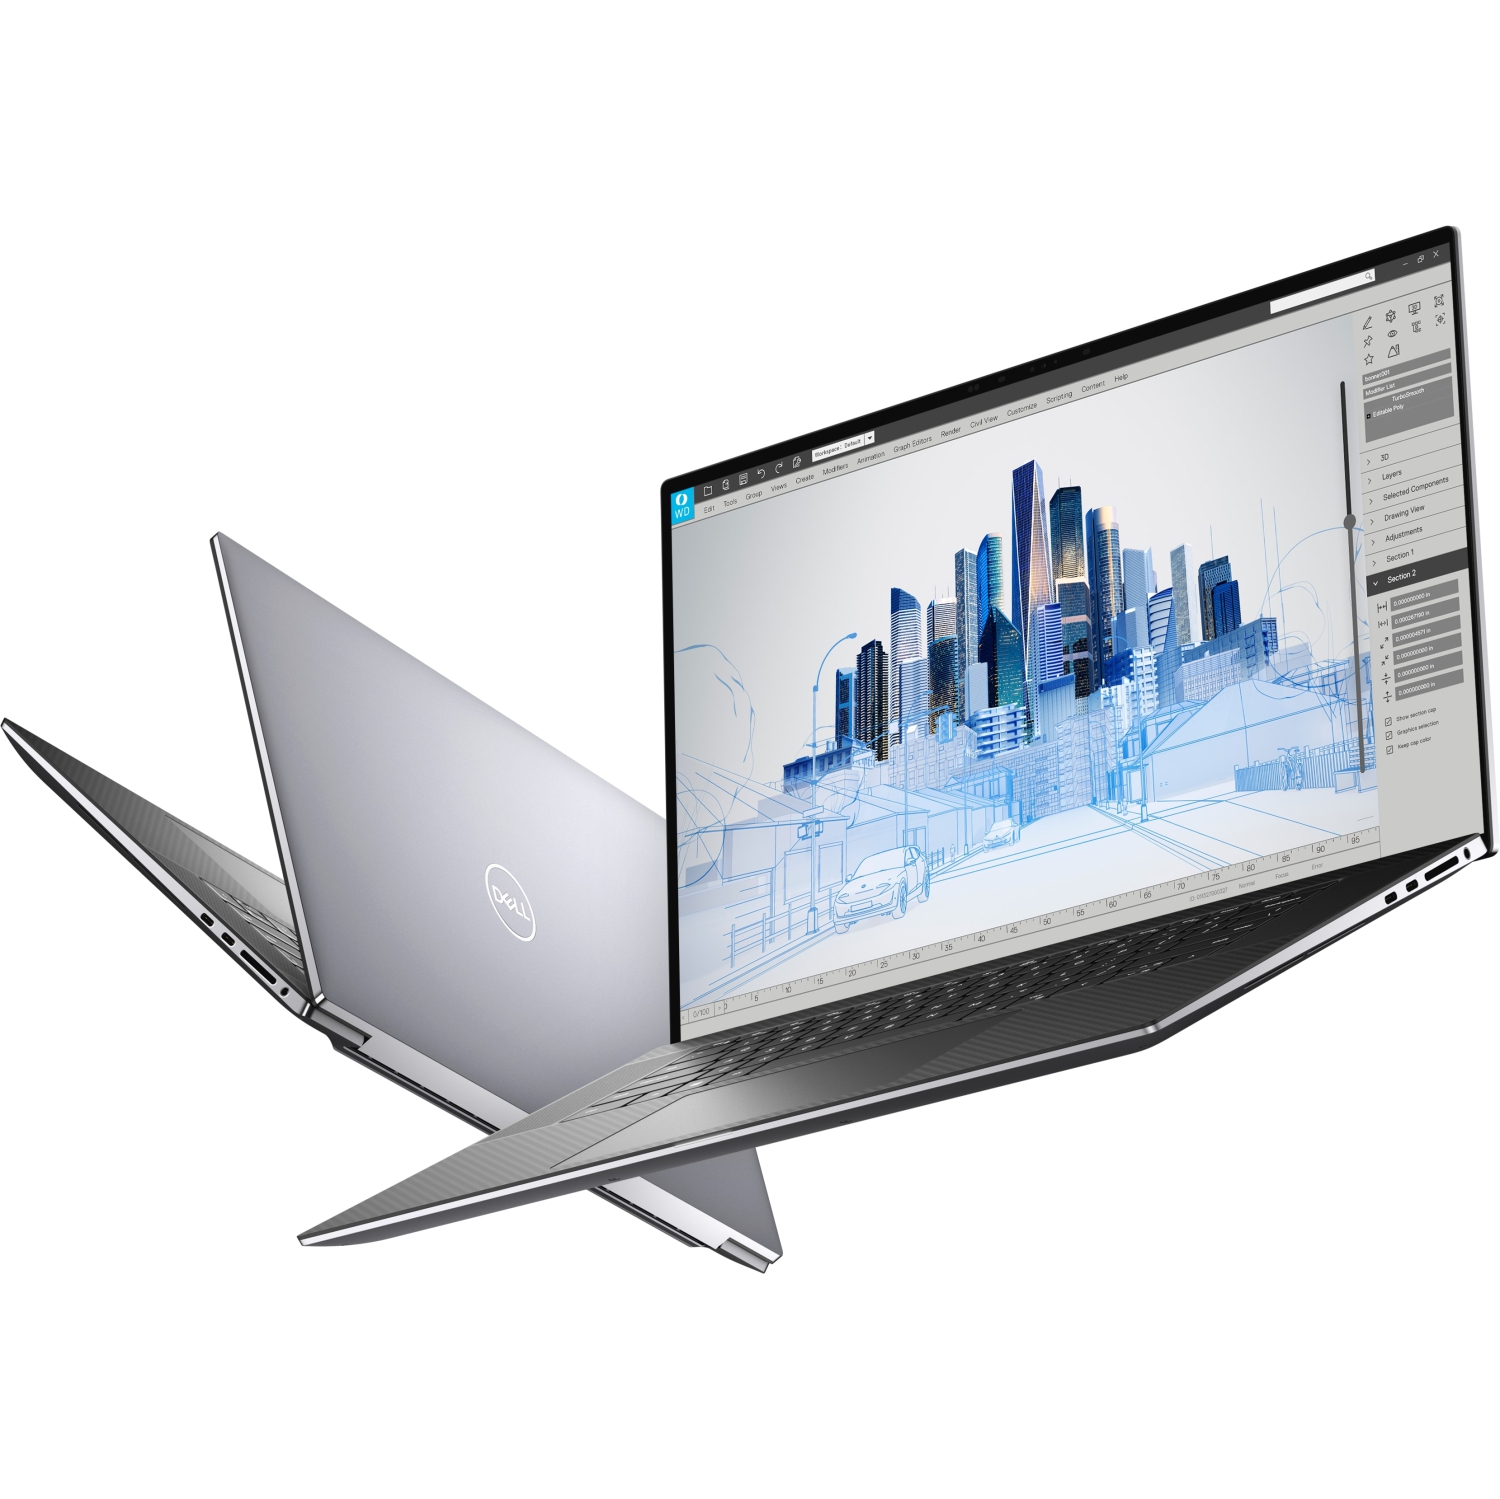 Refurbished (Excellent) – Precision 5000 5760 Workstation Laptop | 17" Touch | Core i7 - - 64GB RAM - RTX A3000 | 8 Cores @ 4.8 GHz